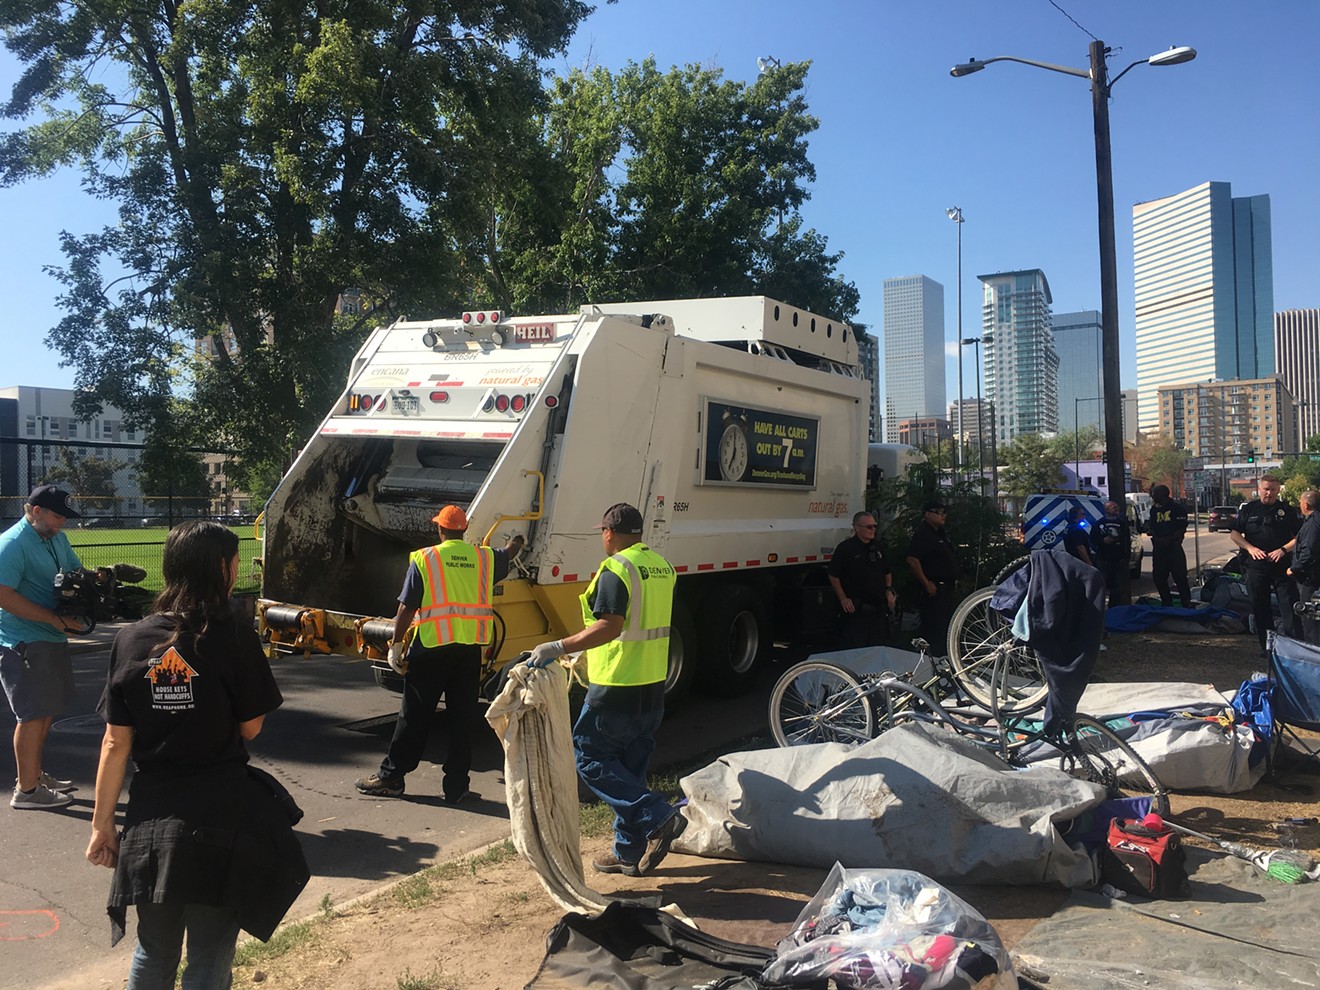 City officials enforced the camping ban in a sweep at 24th and California this morning, September 11.